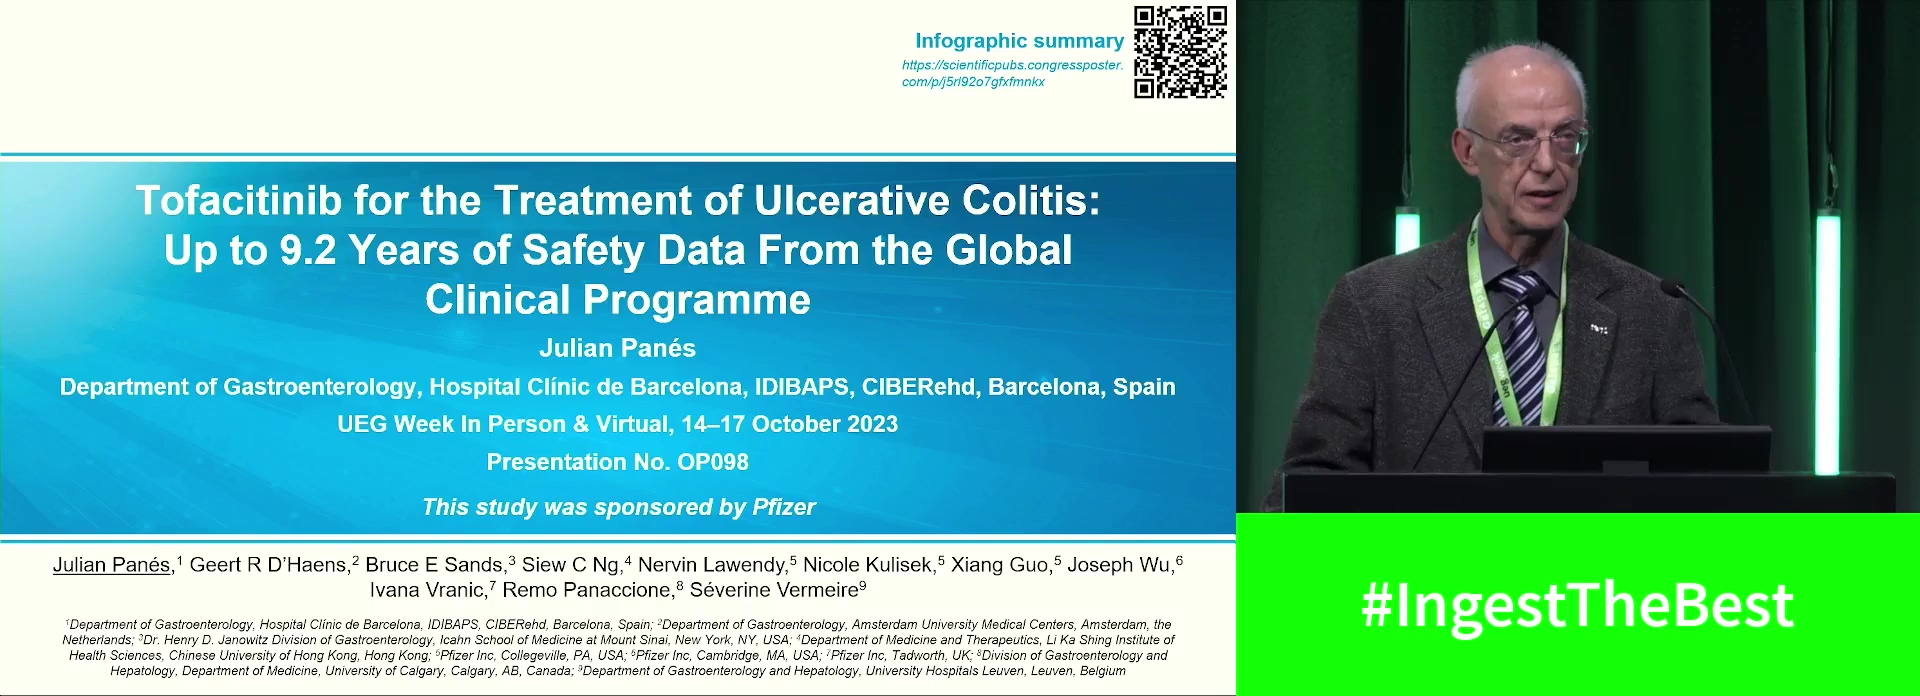 TOFACITINIB FOR THE TREATMENT OF ULCERATIVE COLITIS: UP TO 9.2 YEARS OF SAFETY DATA FROM THE GLOBAL CLINICAL PROGRAMME